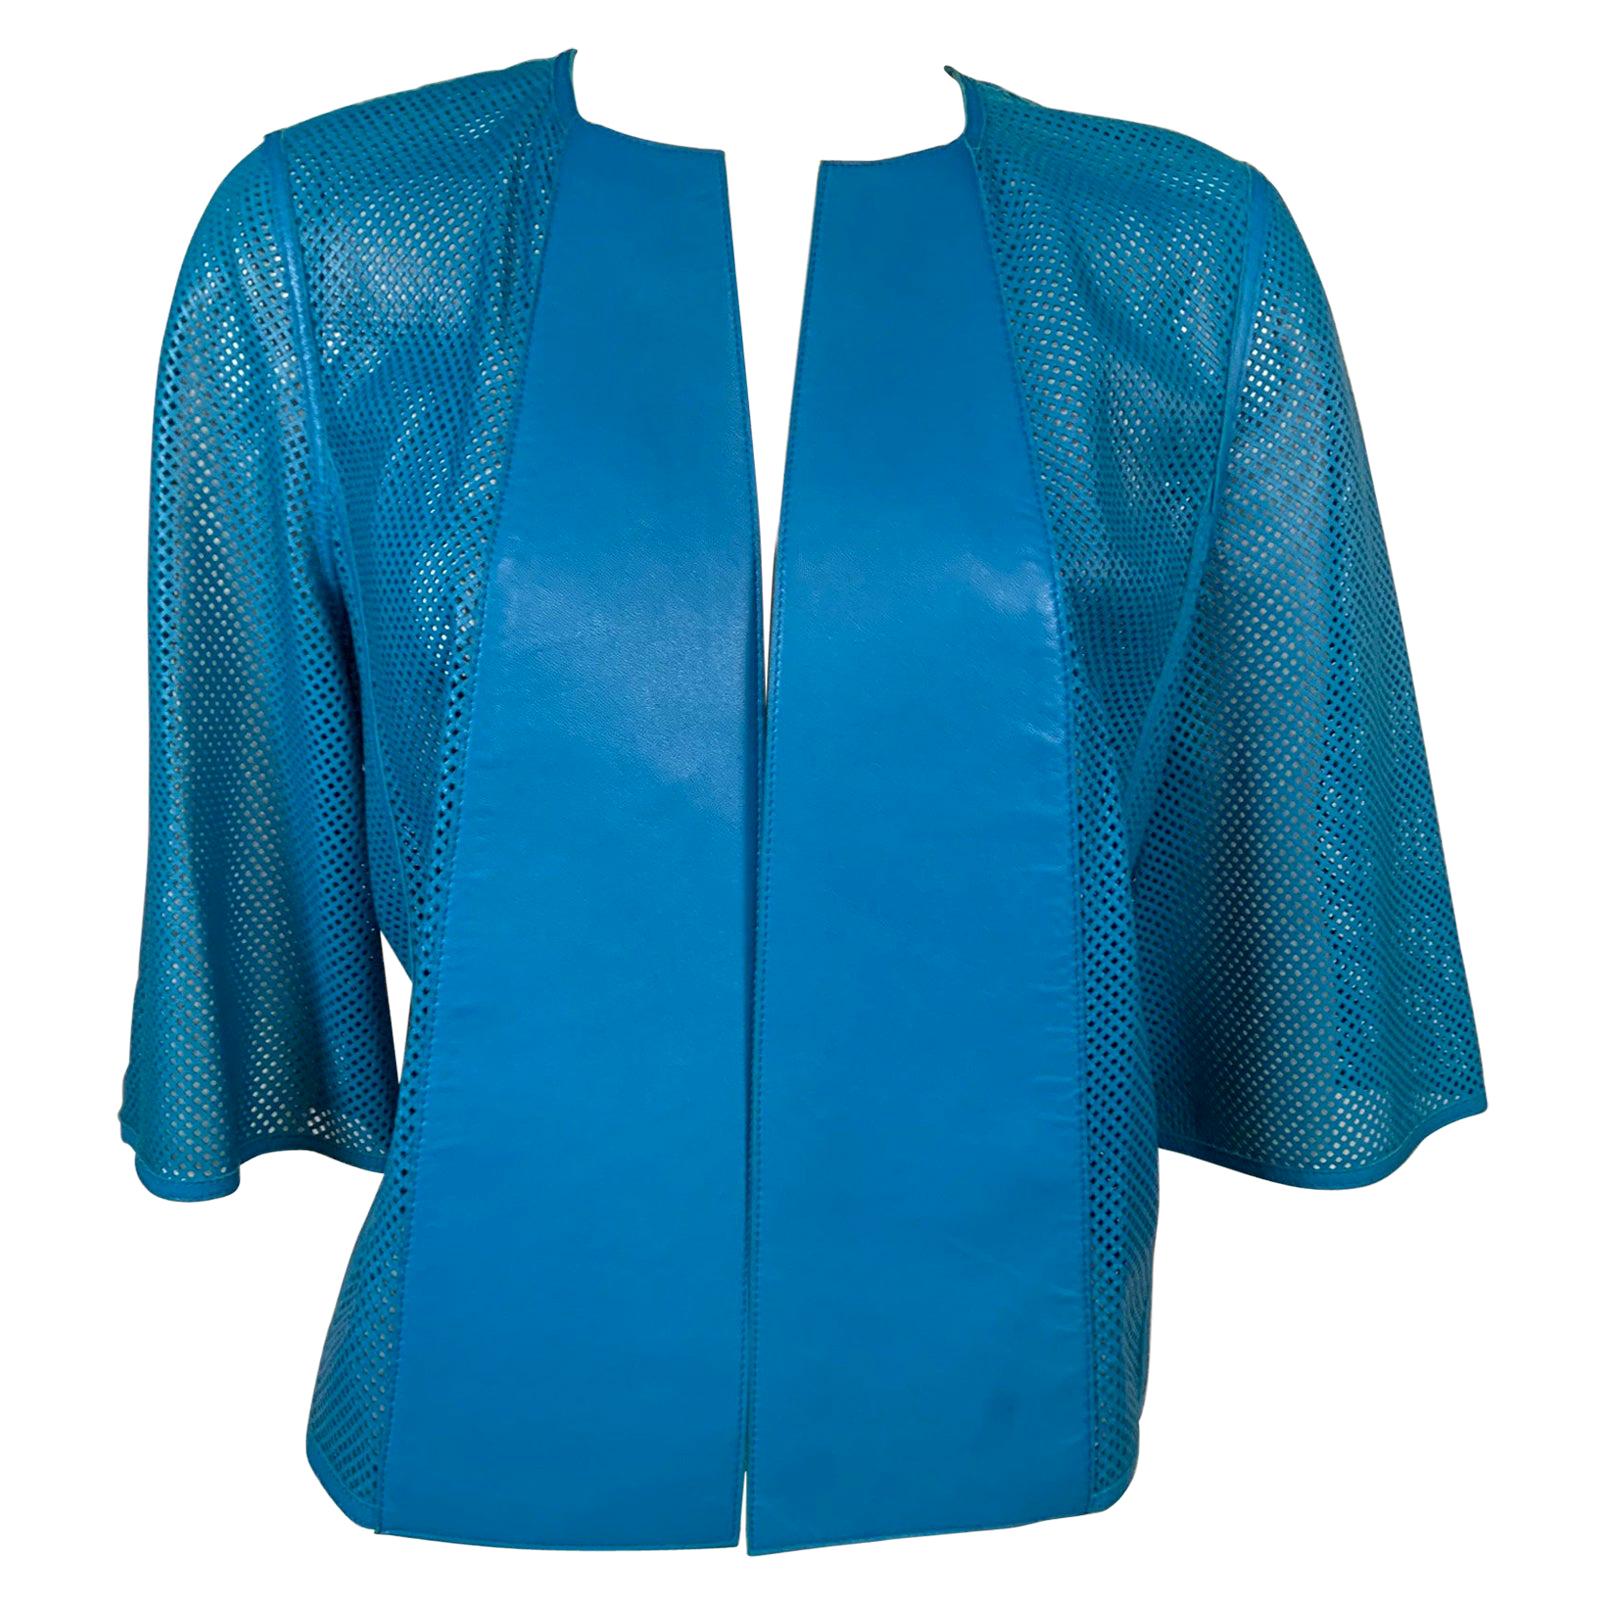 Akris Bright Blue Perforated Leather Jacket